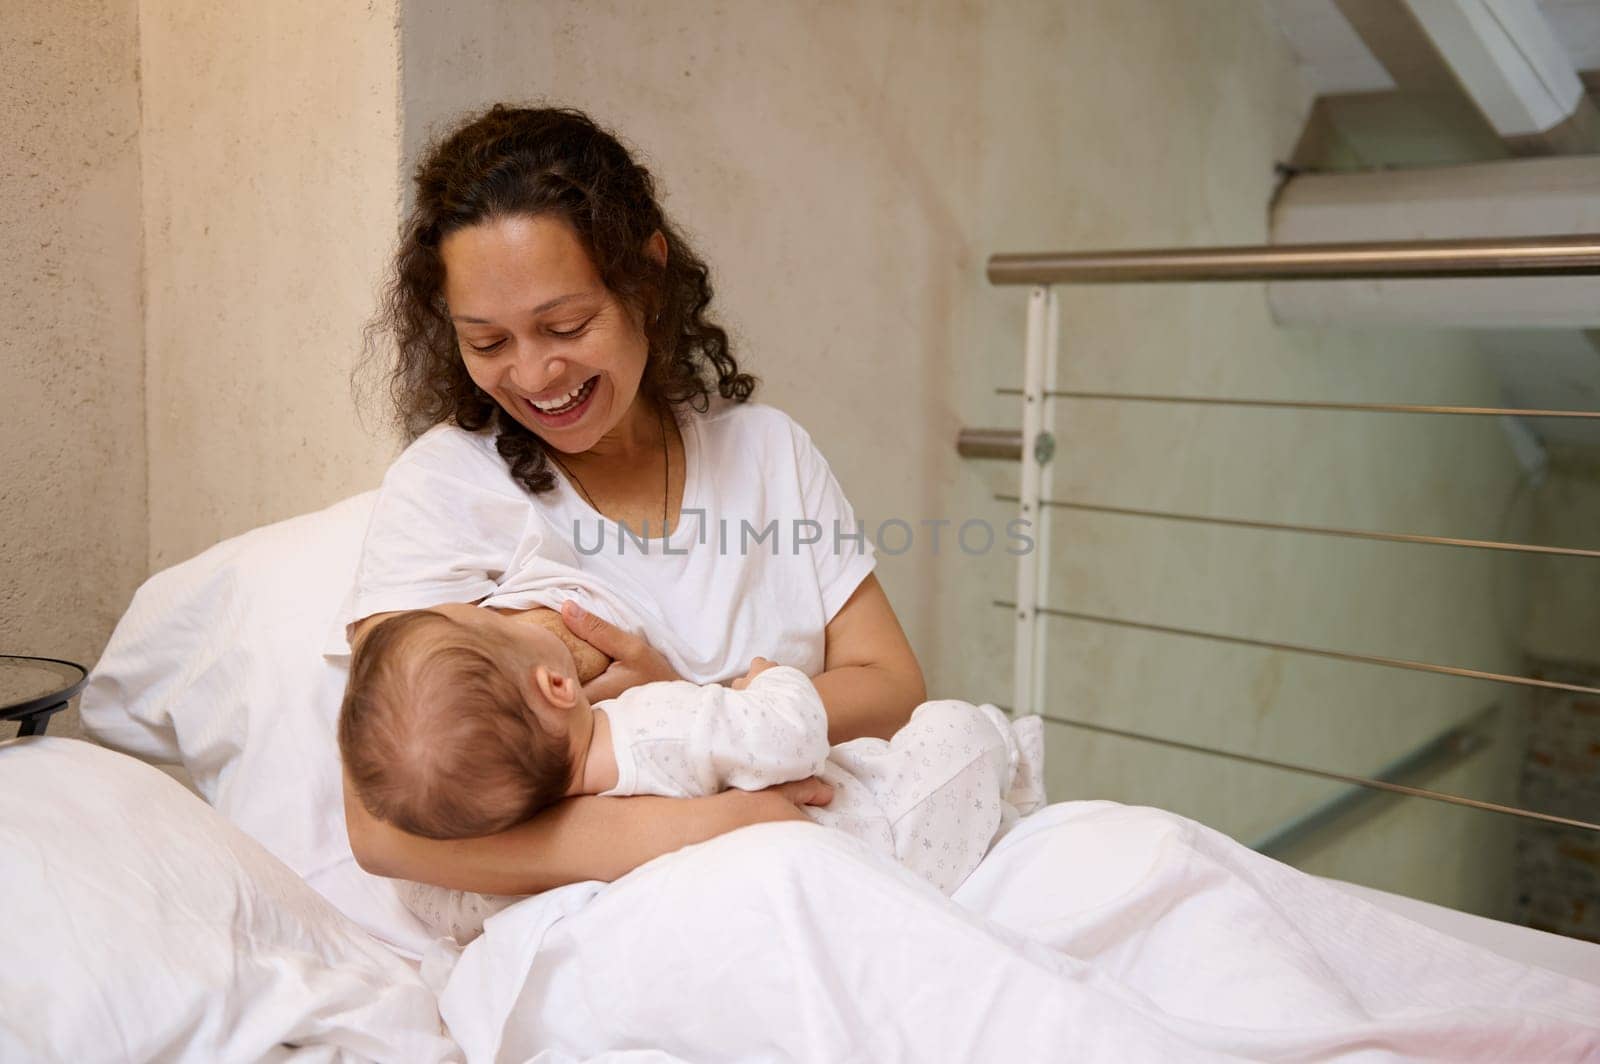 Happy mother smiling breastfeeding newborn baby, sitting on the bed in white bedchamber, expressing happy positive emotions, feeling emotional connection with her beloved infant. Maternity lifestyle